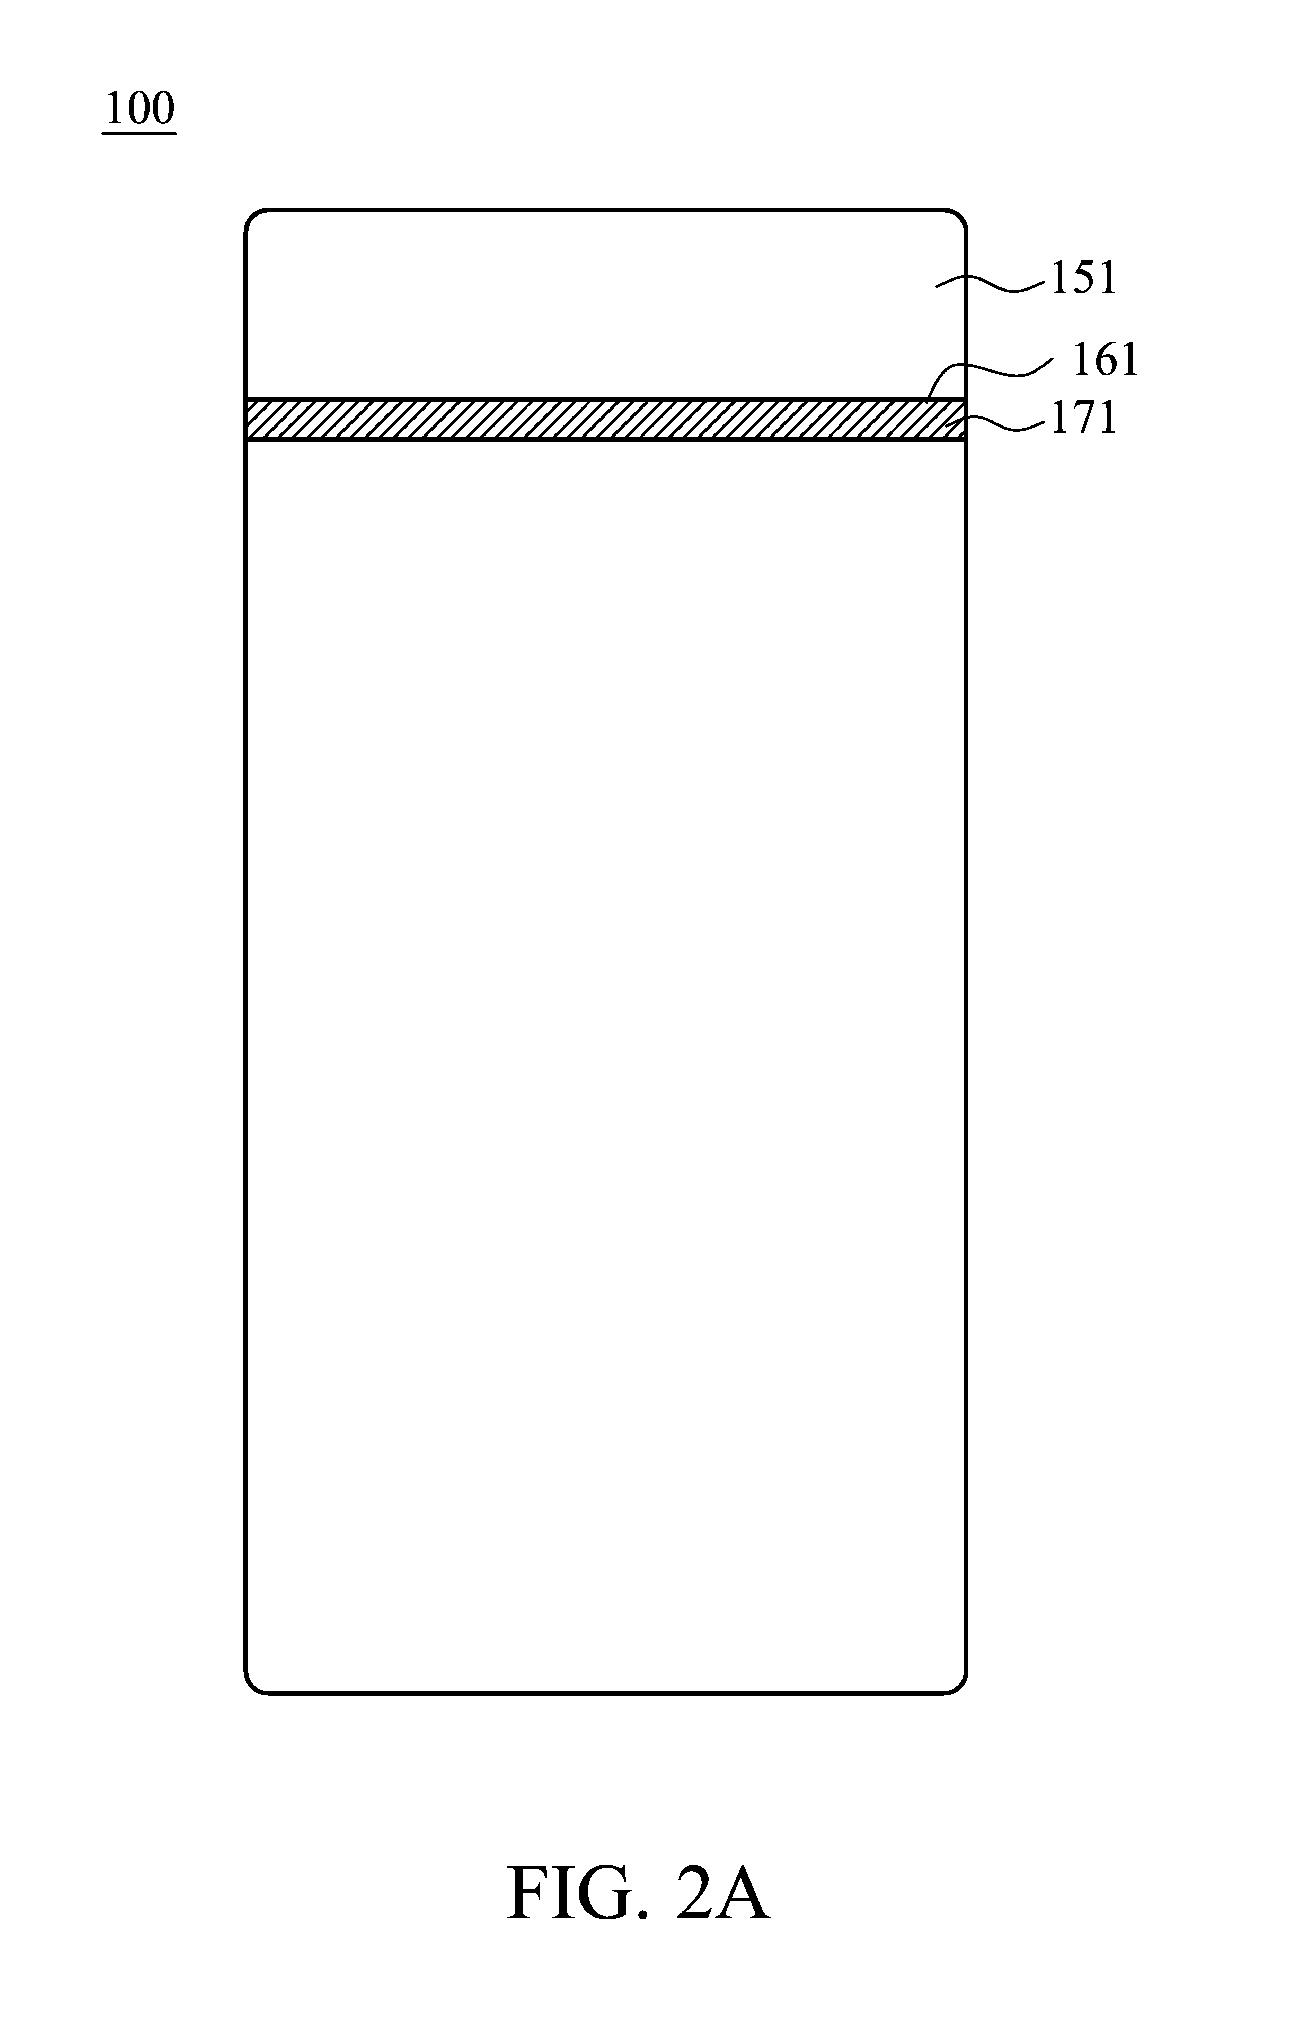 Mobile device and antenna structure